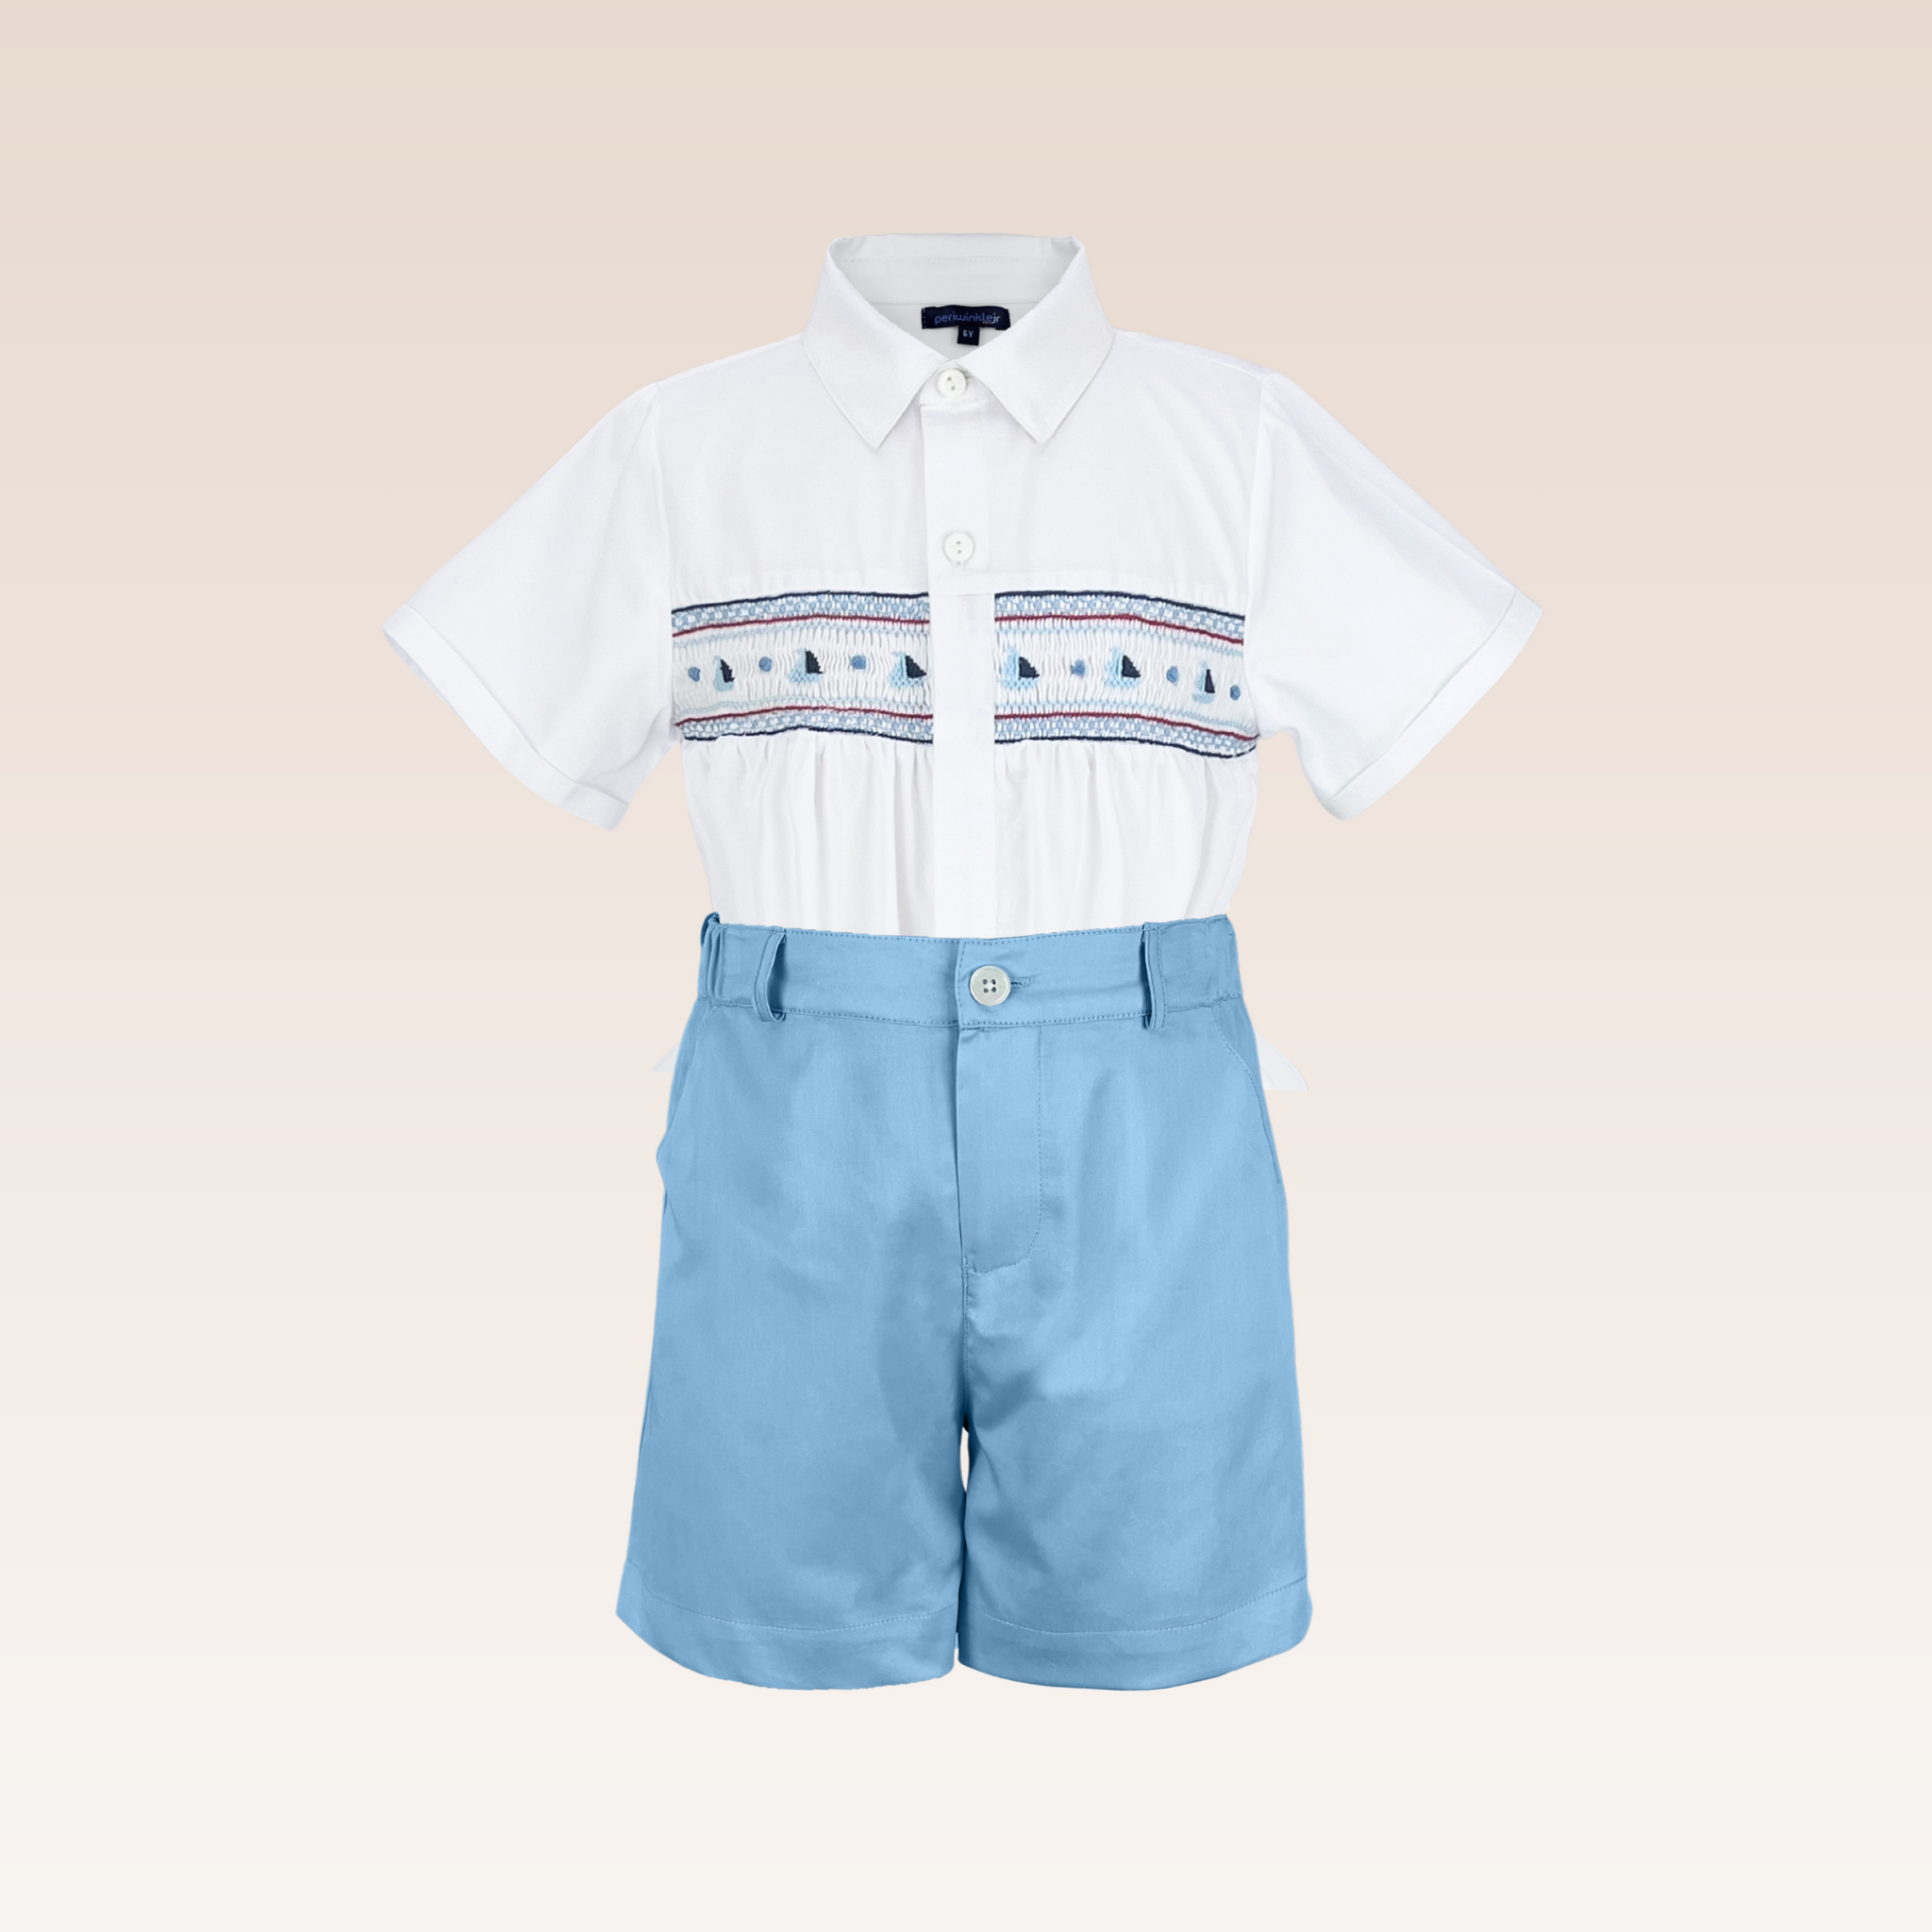 Lyam Boys Lt. Blue Collared Shirt with Smock detail and Shorts set